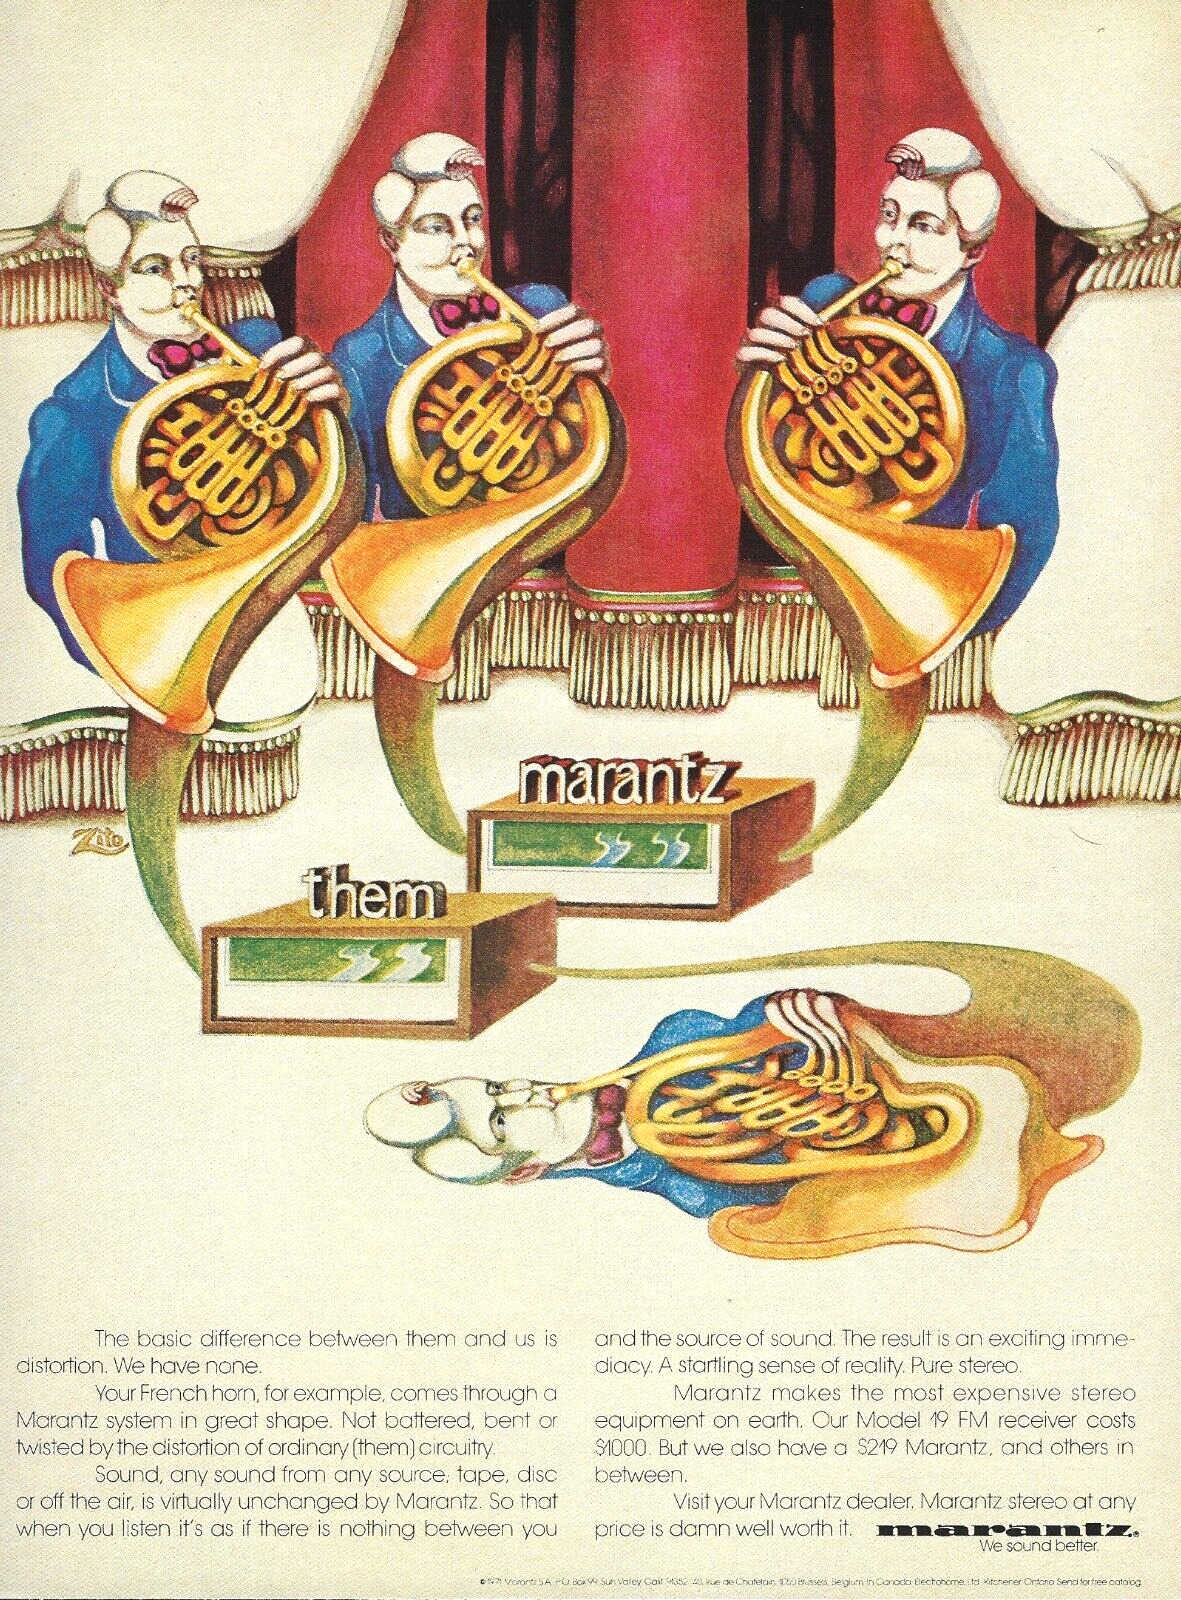 1971 Marantz Stereo Receiver French Horn Distortion Illustrated vintage Print AD